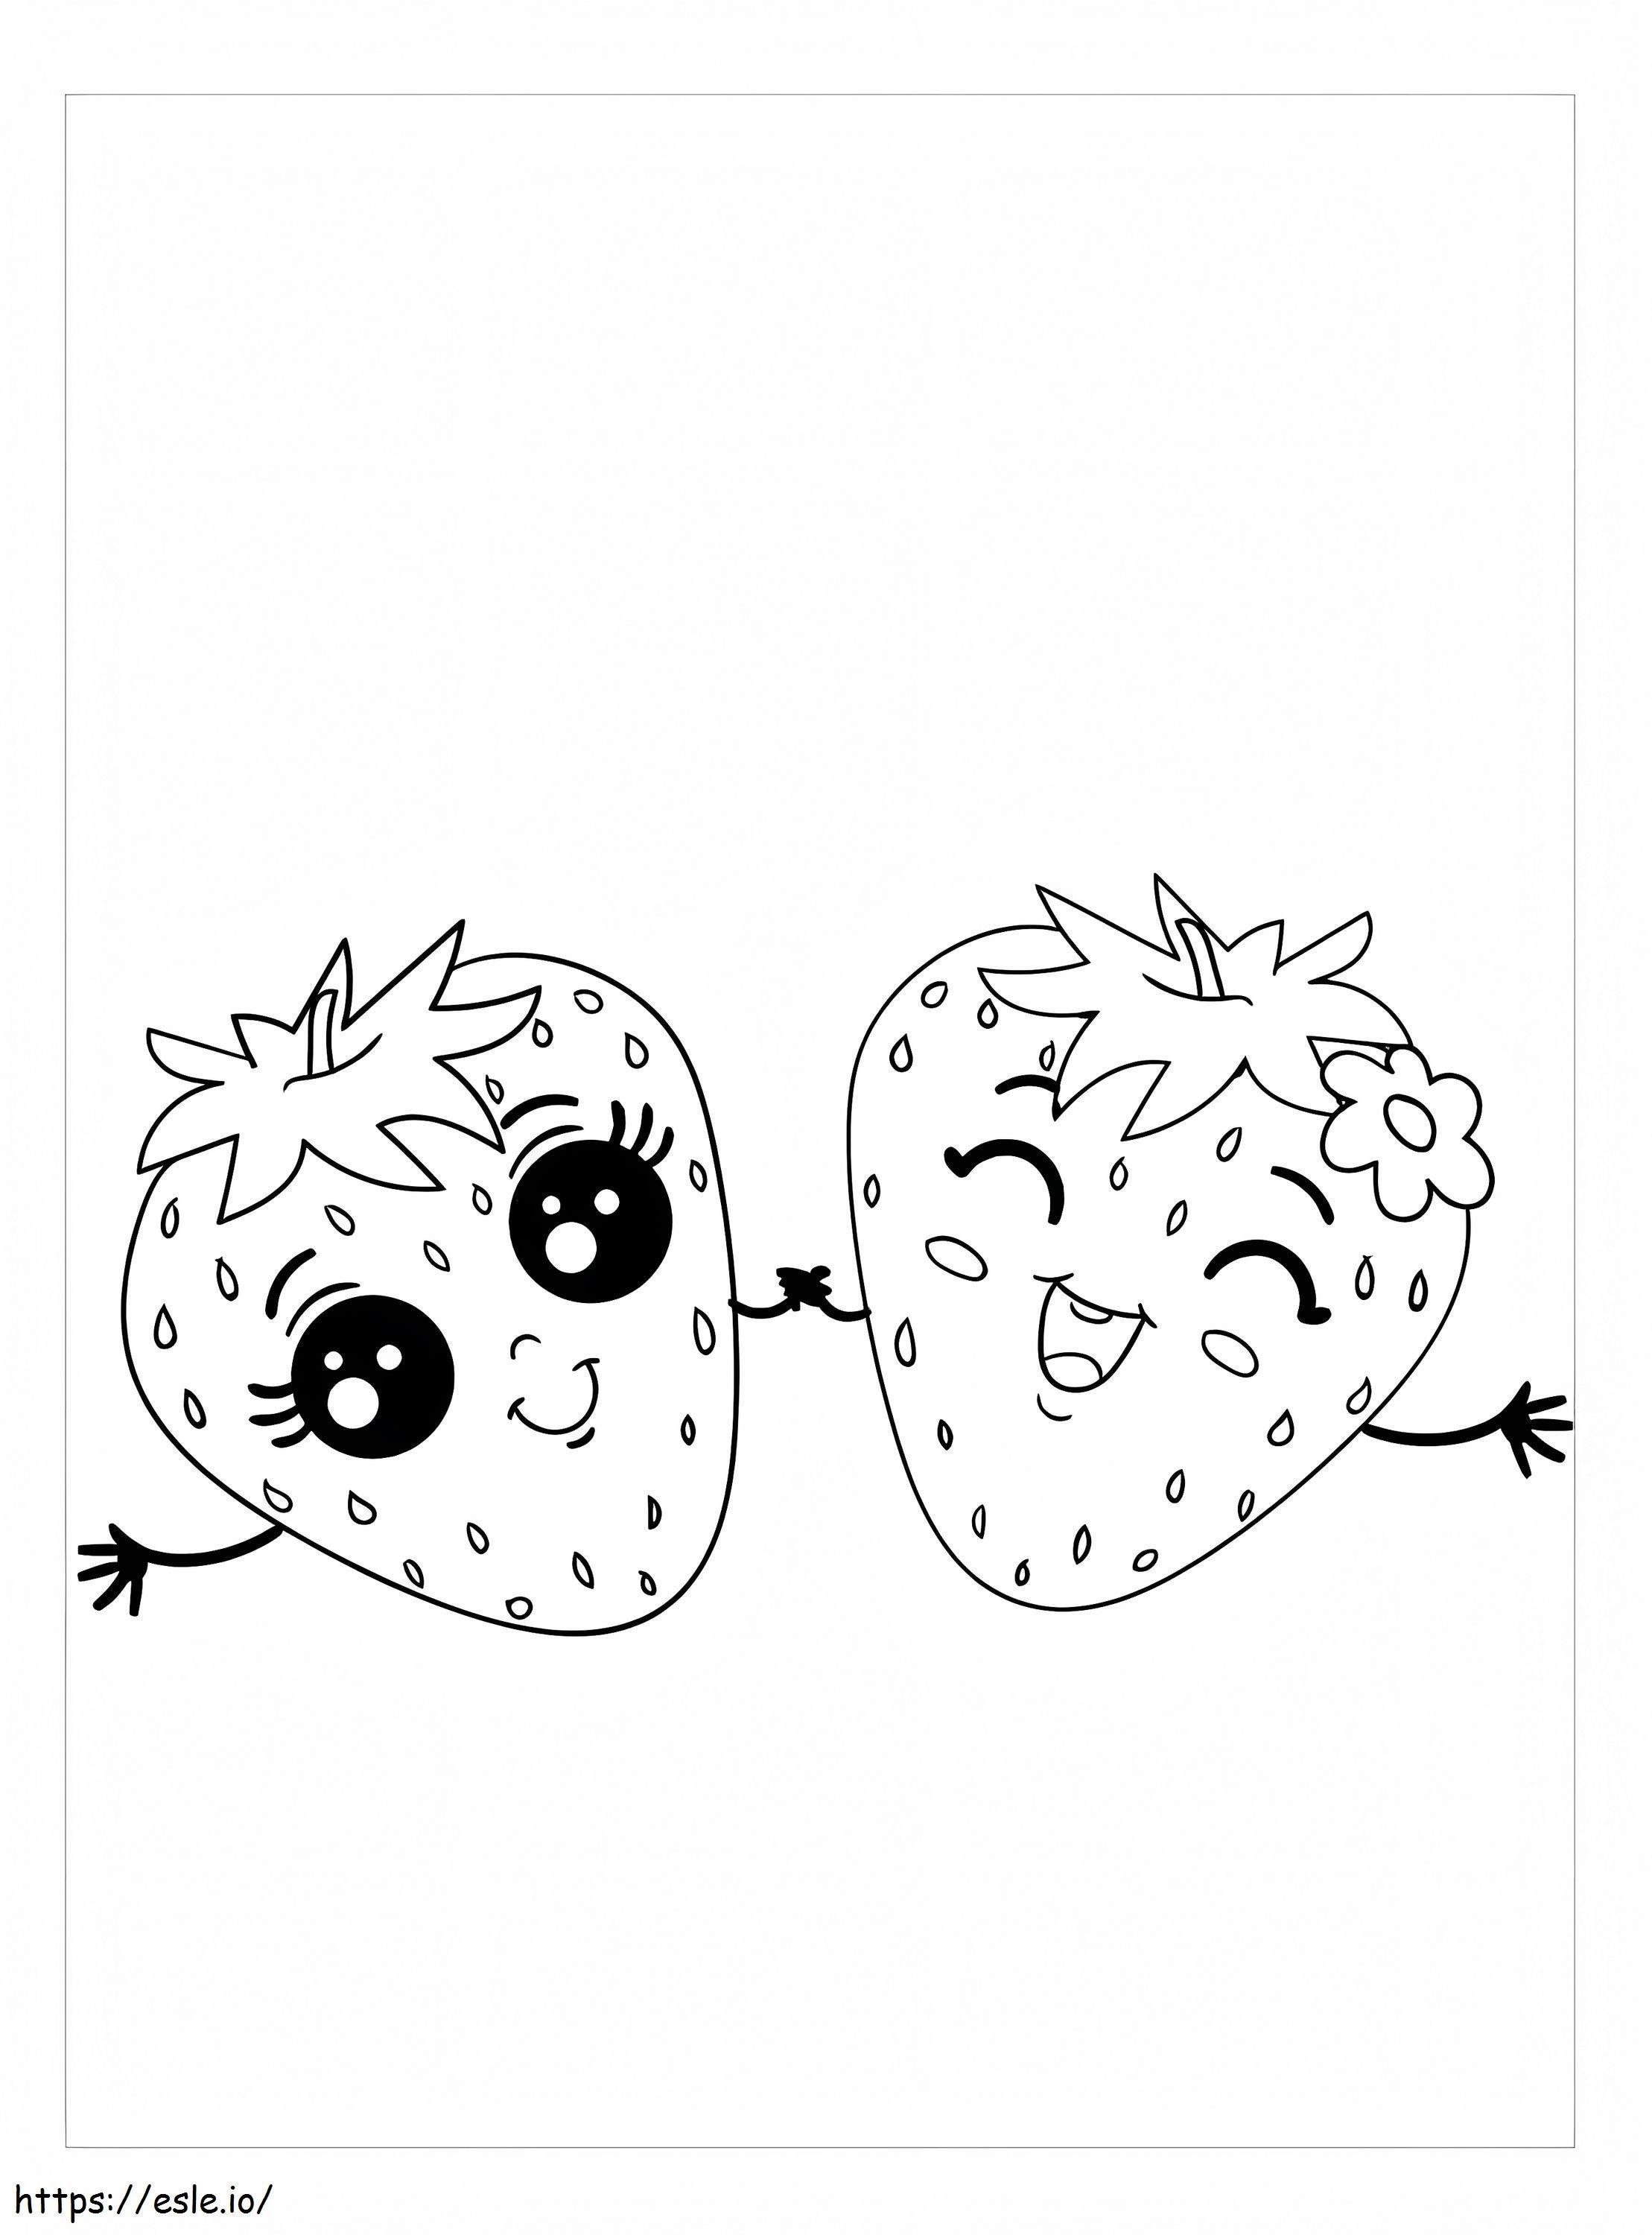 Two Cute Strawberries coloring page